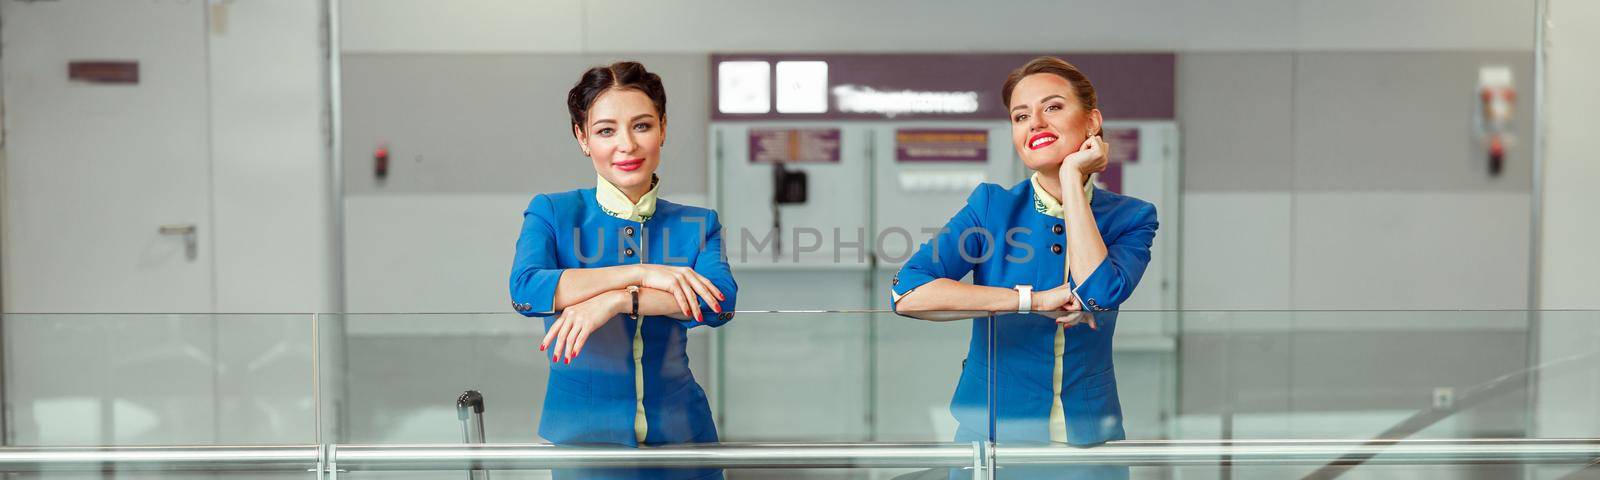 Two women stewardesses with travel bags standing in airport terminal by Yaroslav_astakhov